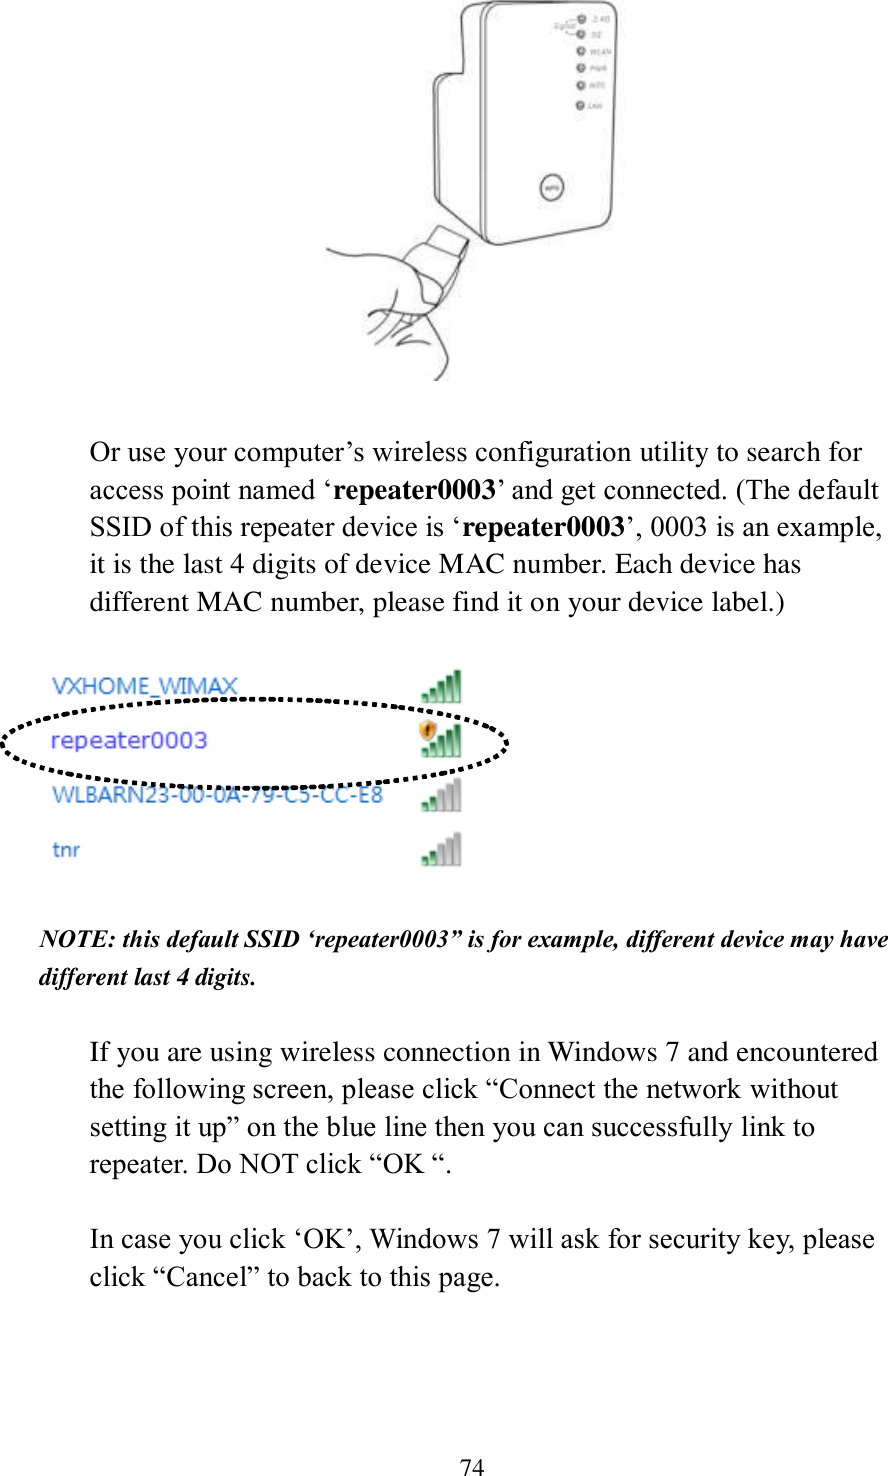 74   Or use your computer’s wireless configuration utility to search for access point named ‘repeater0003’ and get connected. (The default SSID of this repeater device is ‘repeater0003’, 0003 is an example, it is the last 4 digits of device MAC number. Each device has different MAC number, please find it on your device label.)    NOTE: this default SSID ‘repeater0003” is for example, different device may have different last 4 digits.  If you are using wireless connection in Windows 7 and encountered the following screen, please click “Connect the network without setting it up” on the blue line then you can successfully link to repeater. Do NOT click “OK “.    In case you click ‘OK’, Windows 7 will ask for security key, please click “Cancel” to back to this page.  